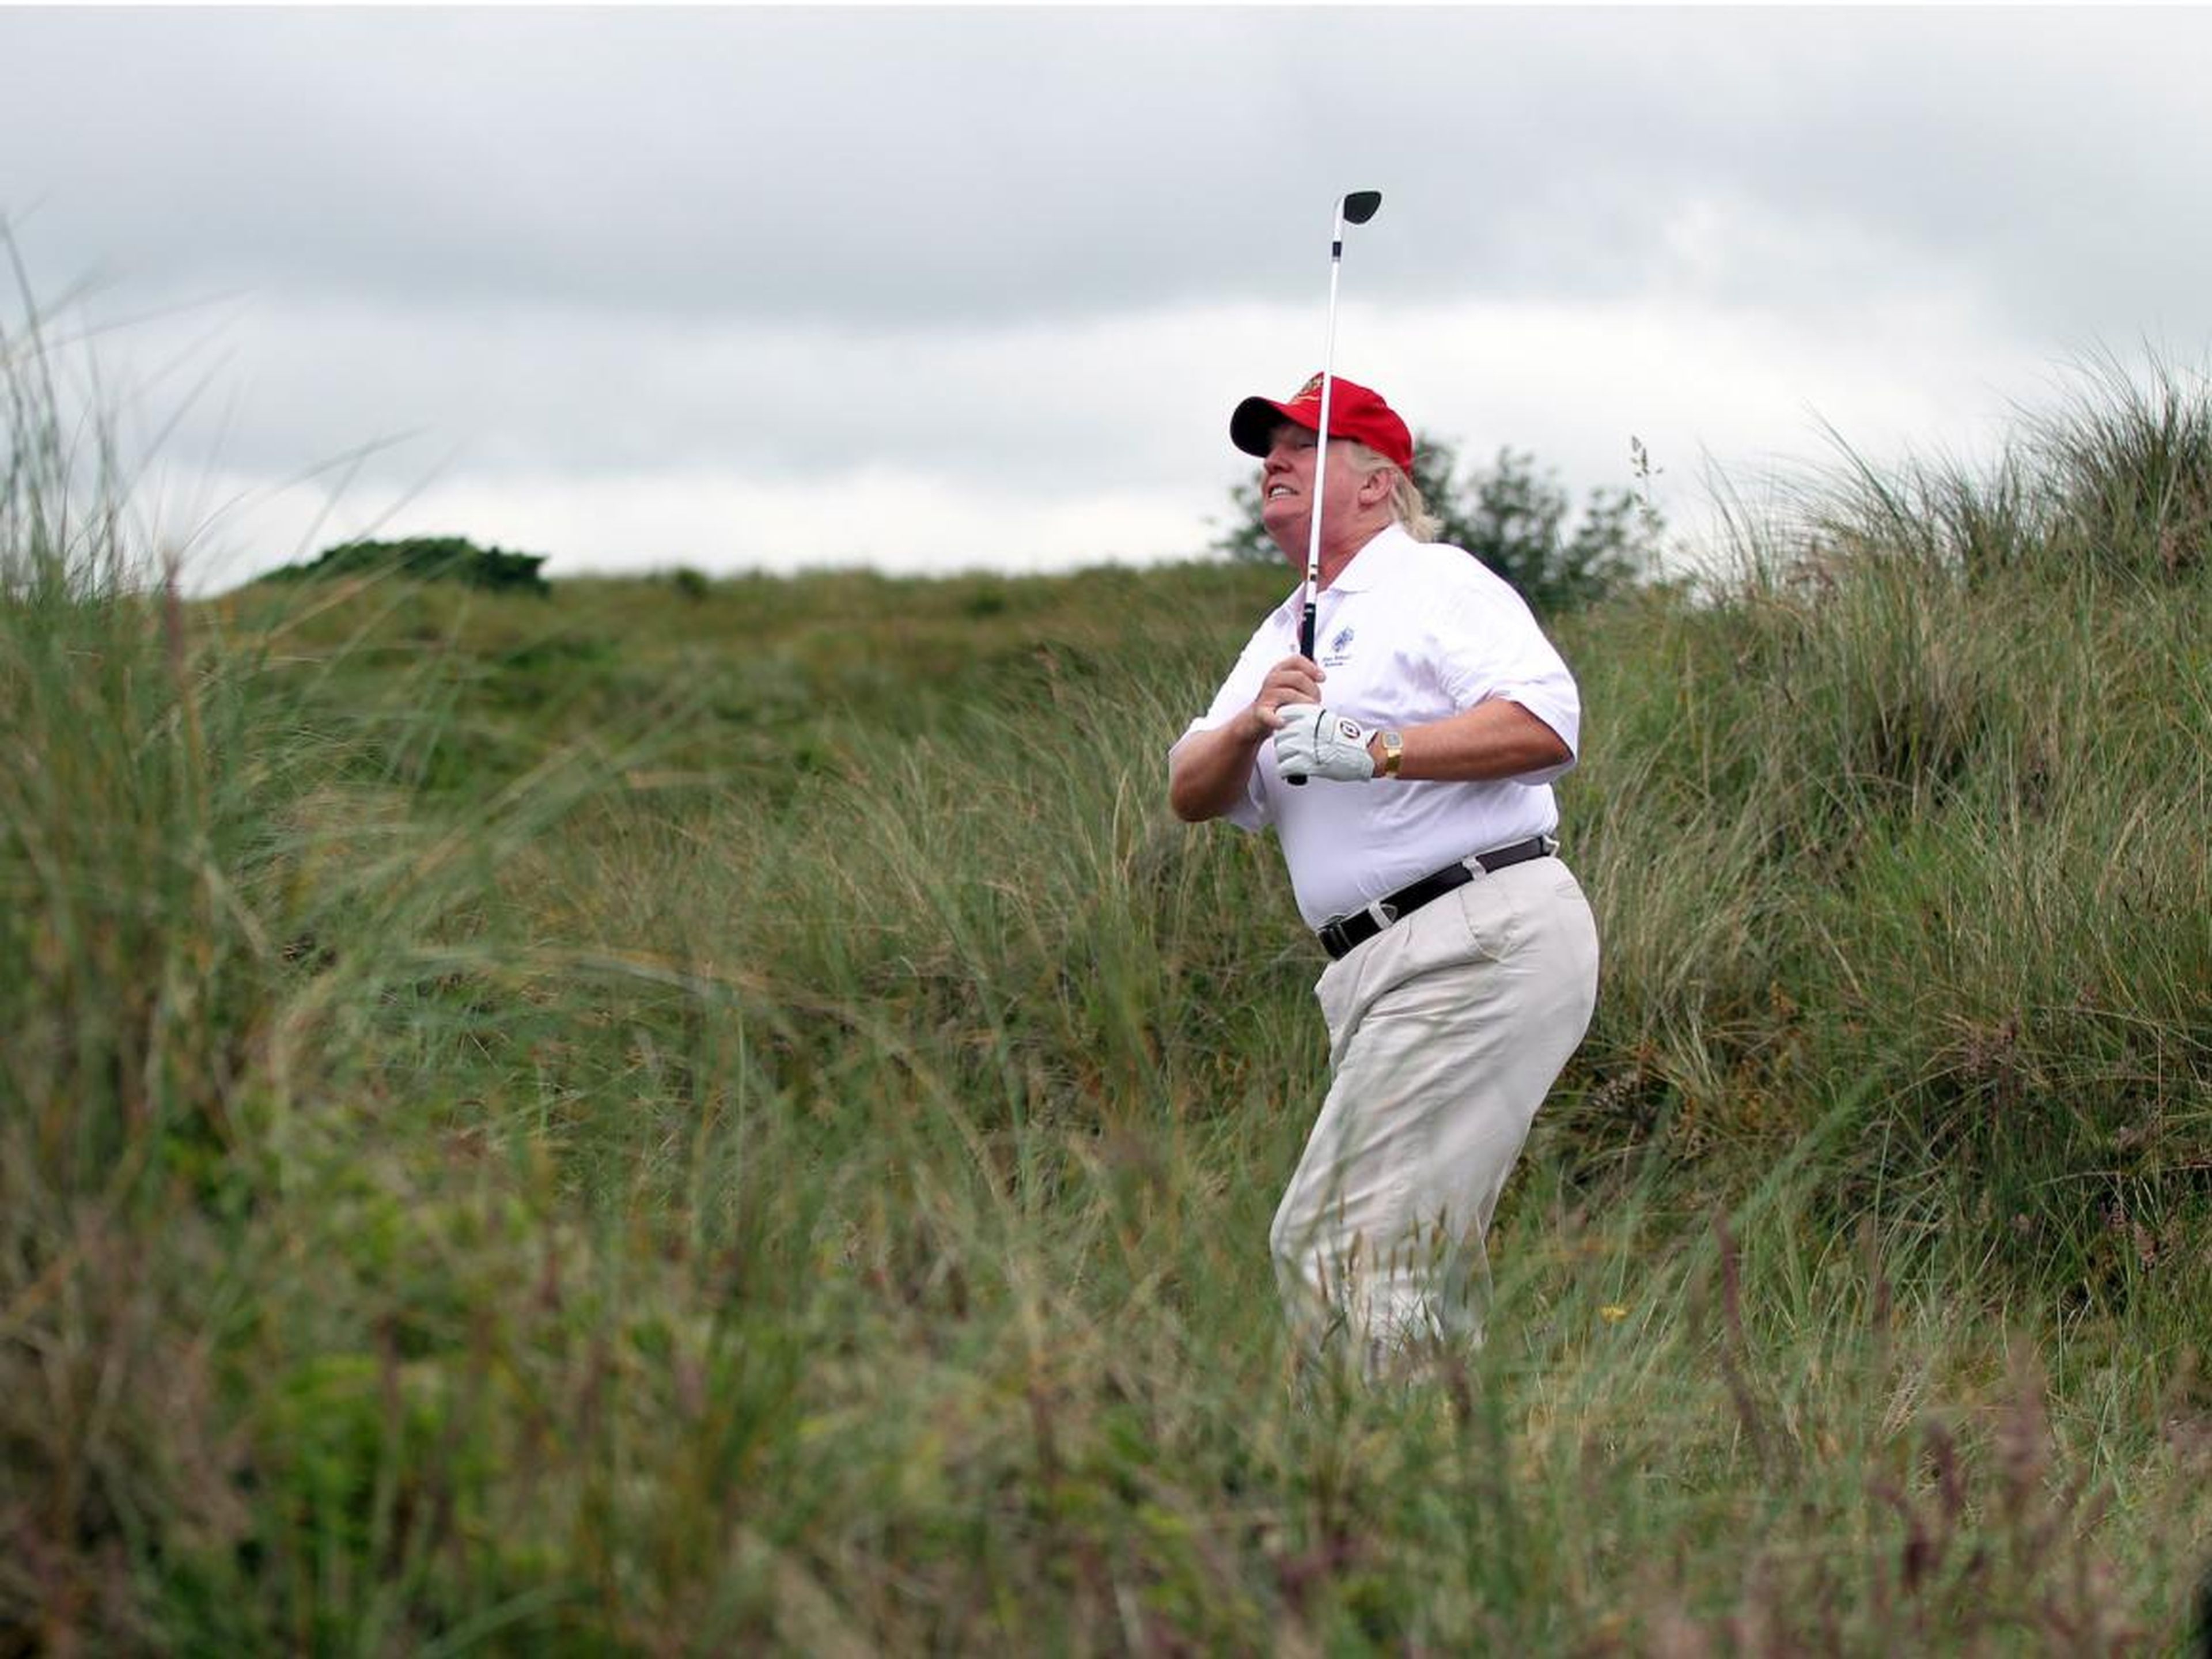 President Donald Trump has visited his golf courses on 25% of his 590 days in office.